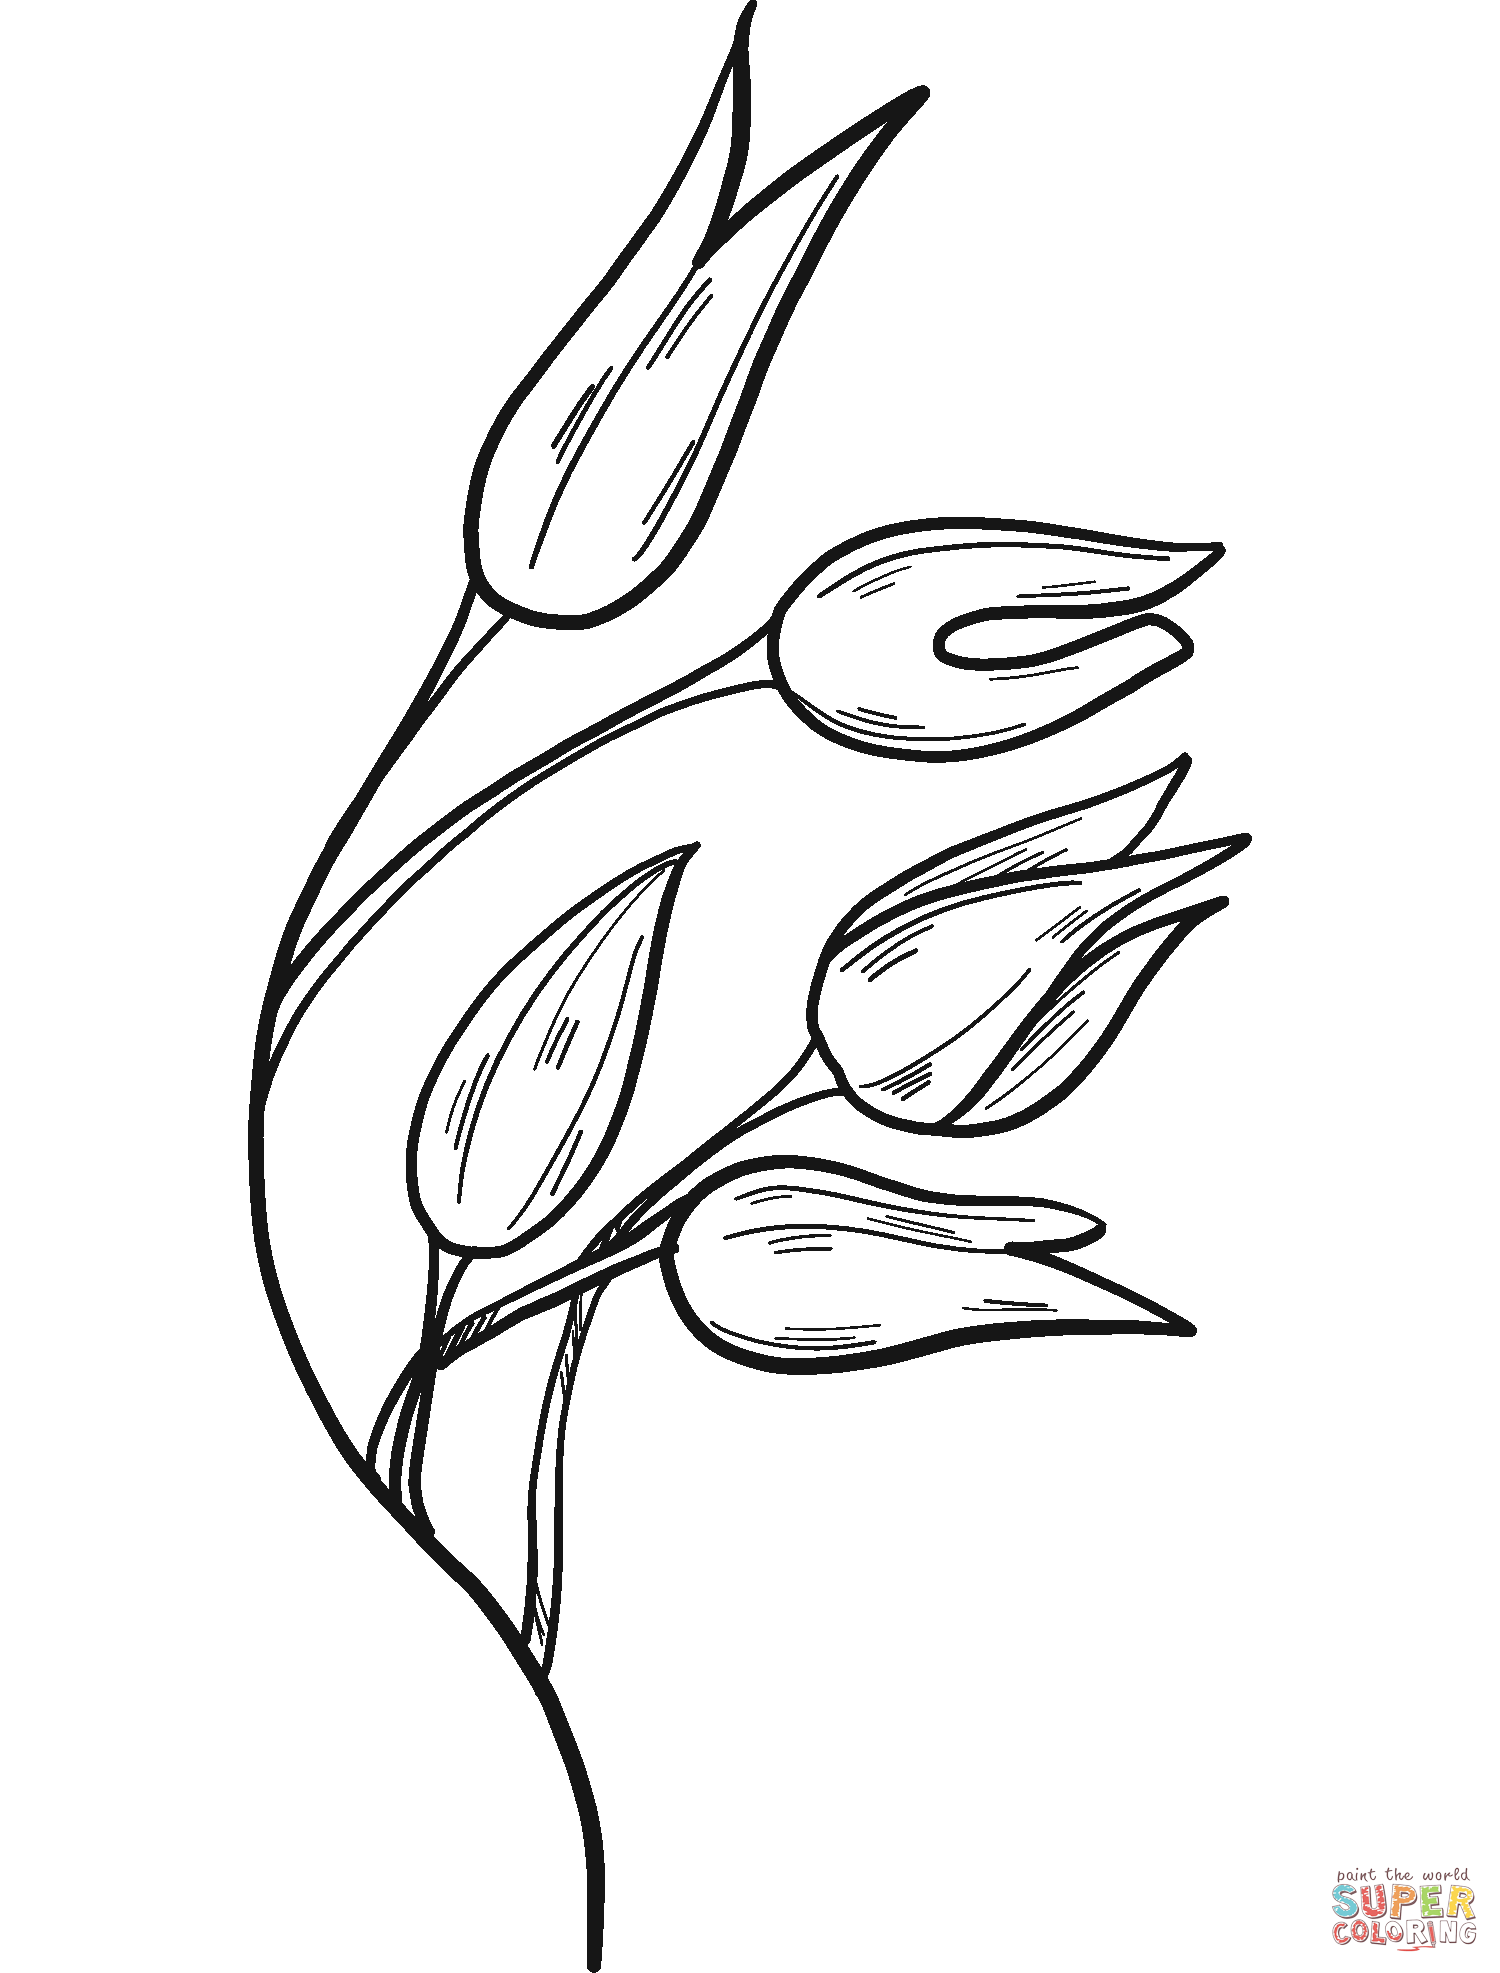 Wheat Coloring Pages